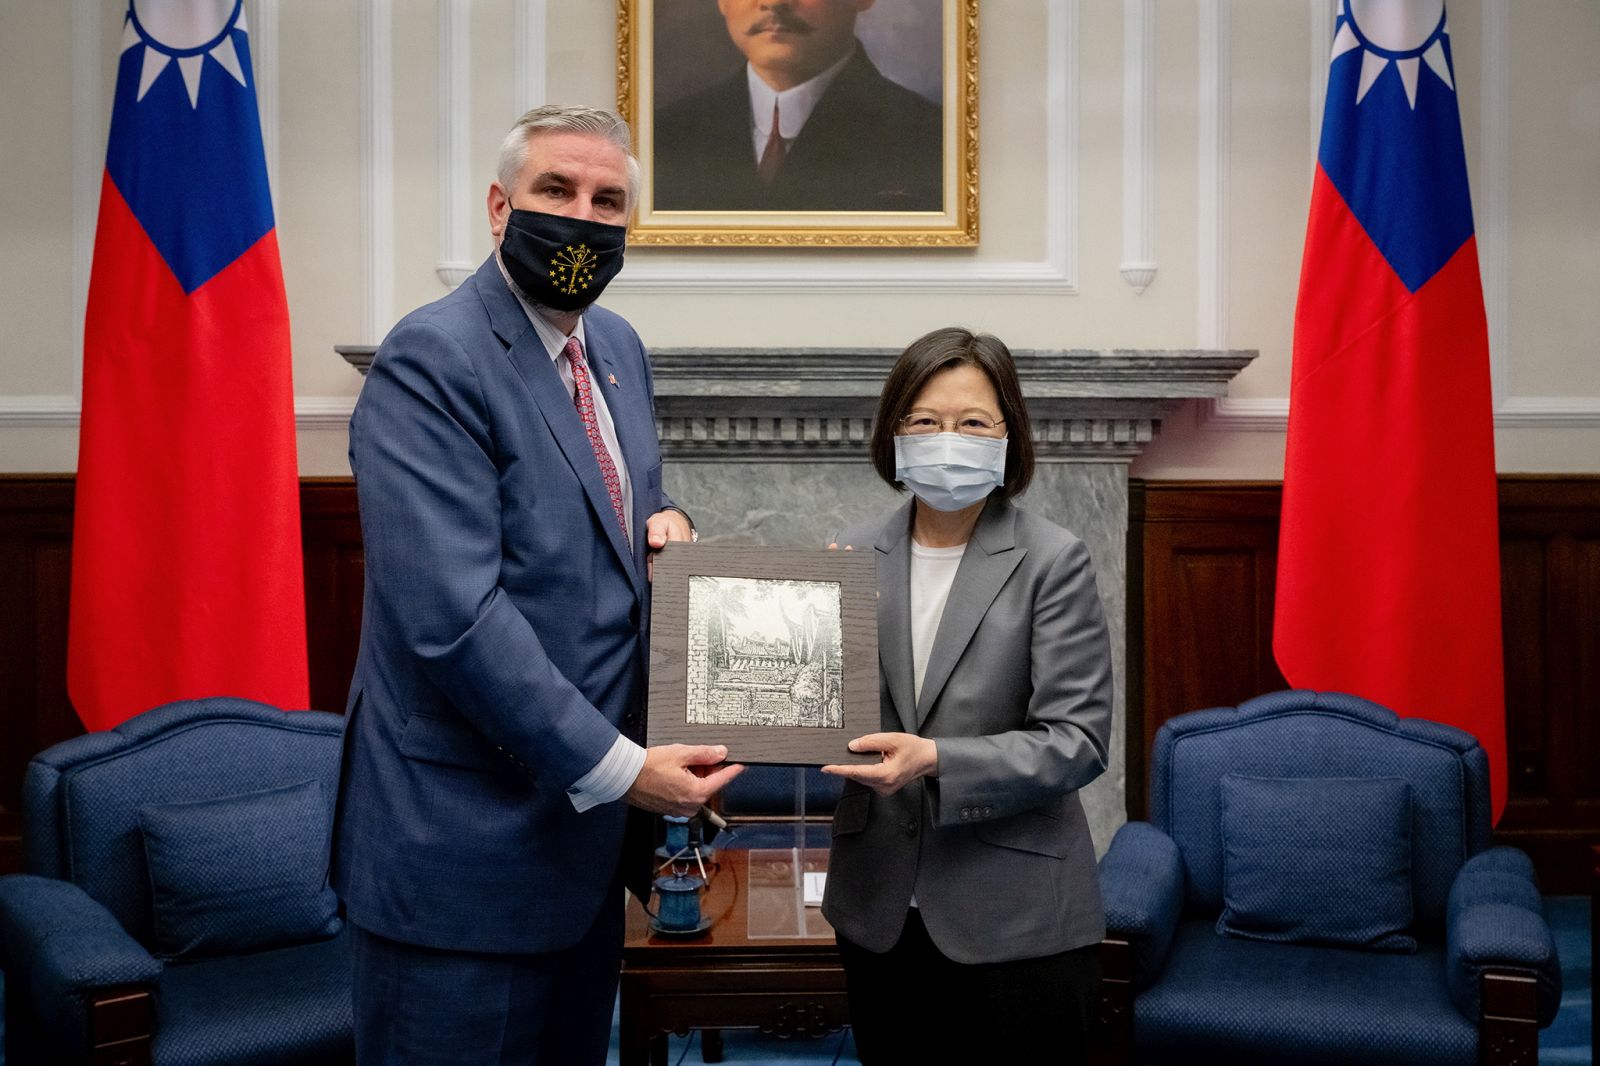 epa10133115 A handout photo made available by the Taiwan Presidential Office shows Taiwan President Tsai Ing-wen (R) posing for a photo with Indiana Governor Eric Holcomb (L) during a meeting inside the Presidential office in Taipei, Taiwan, 22 August 2022. Holcomb is on a four-day visit to Taiwan to meet senior officials and business sector representatives. According to the Taiwan Ministry of Foreign Affairs (MOFA), Indiana became the first US state to forge a sister-state relationship with Taiwan in 1979.  EPA/MAKOTO LIN/TAIWAN PRESIDENTIAL OFFICE HANDOUT  HANDOUT EDITORIAL USE ONLY/NO SALES